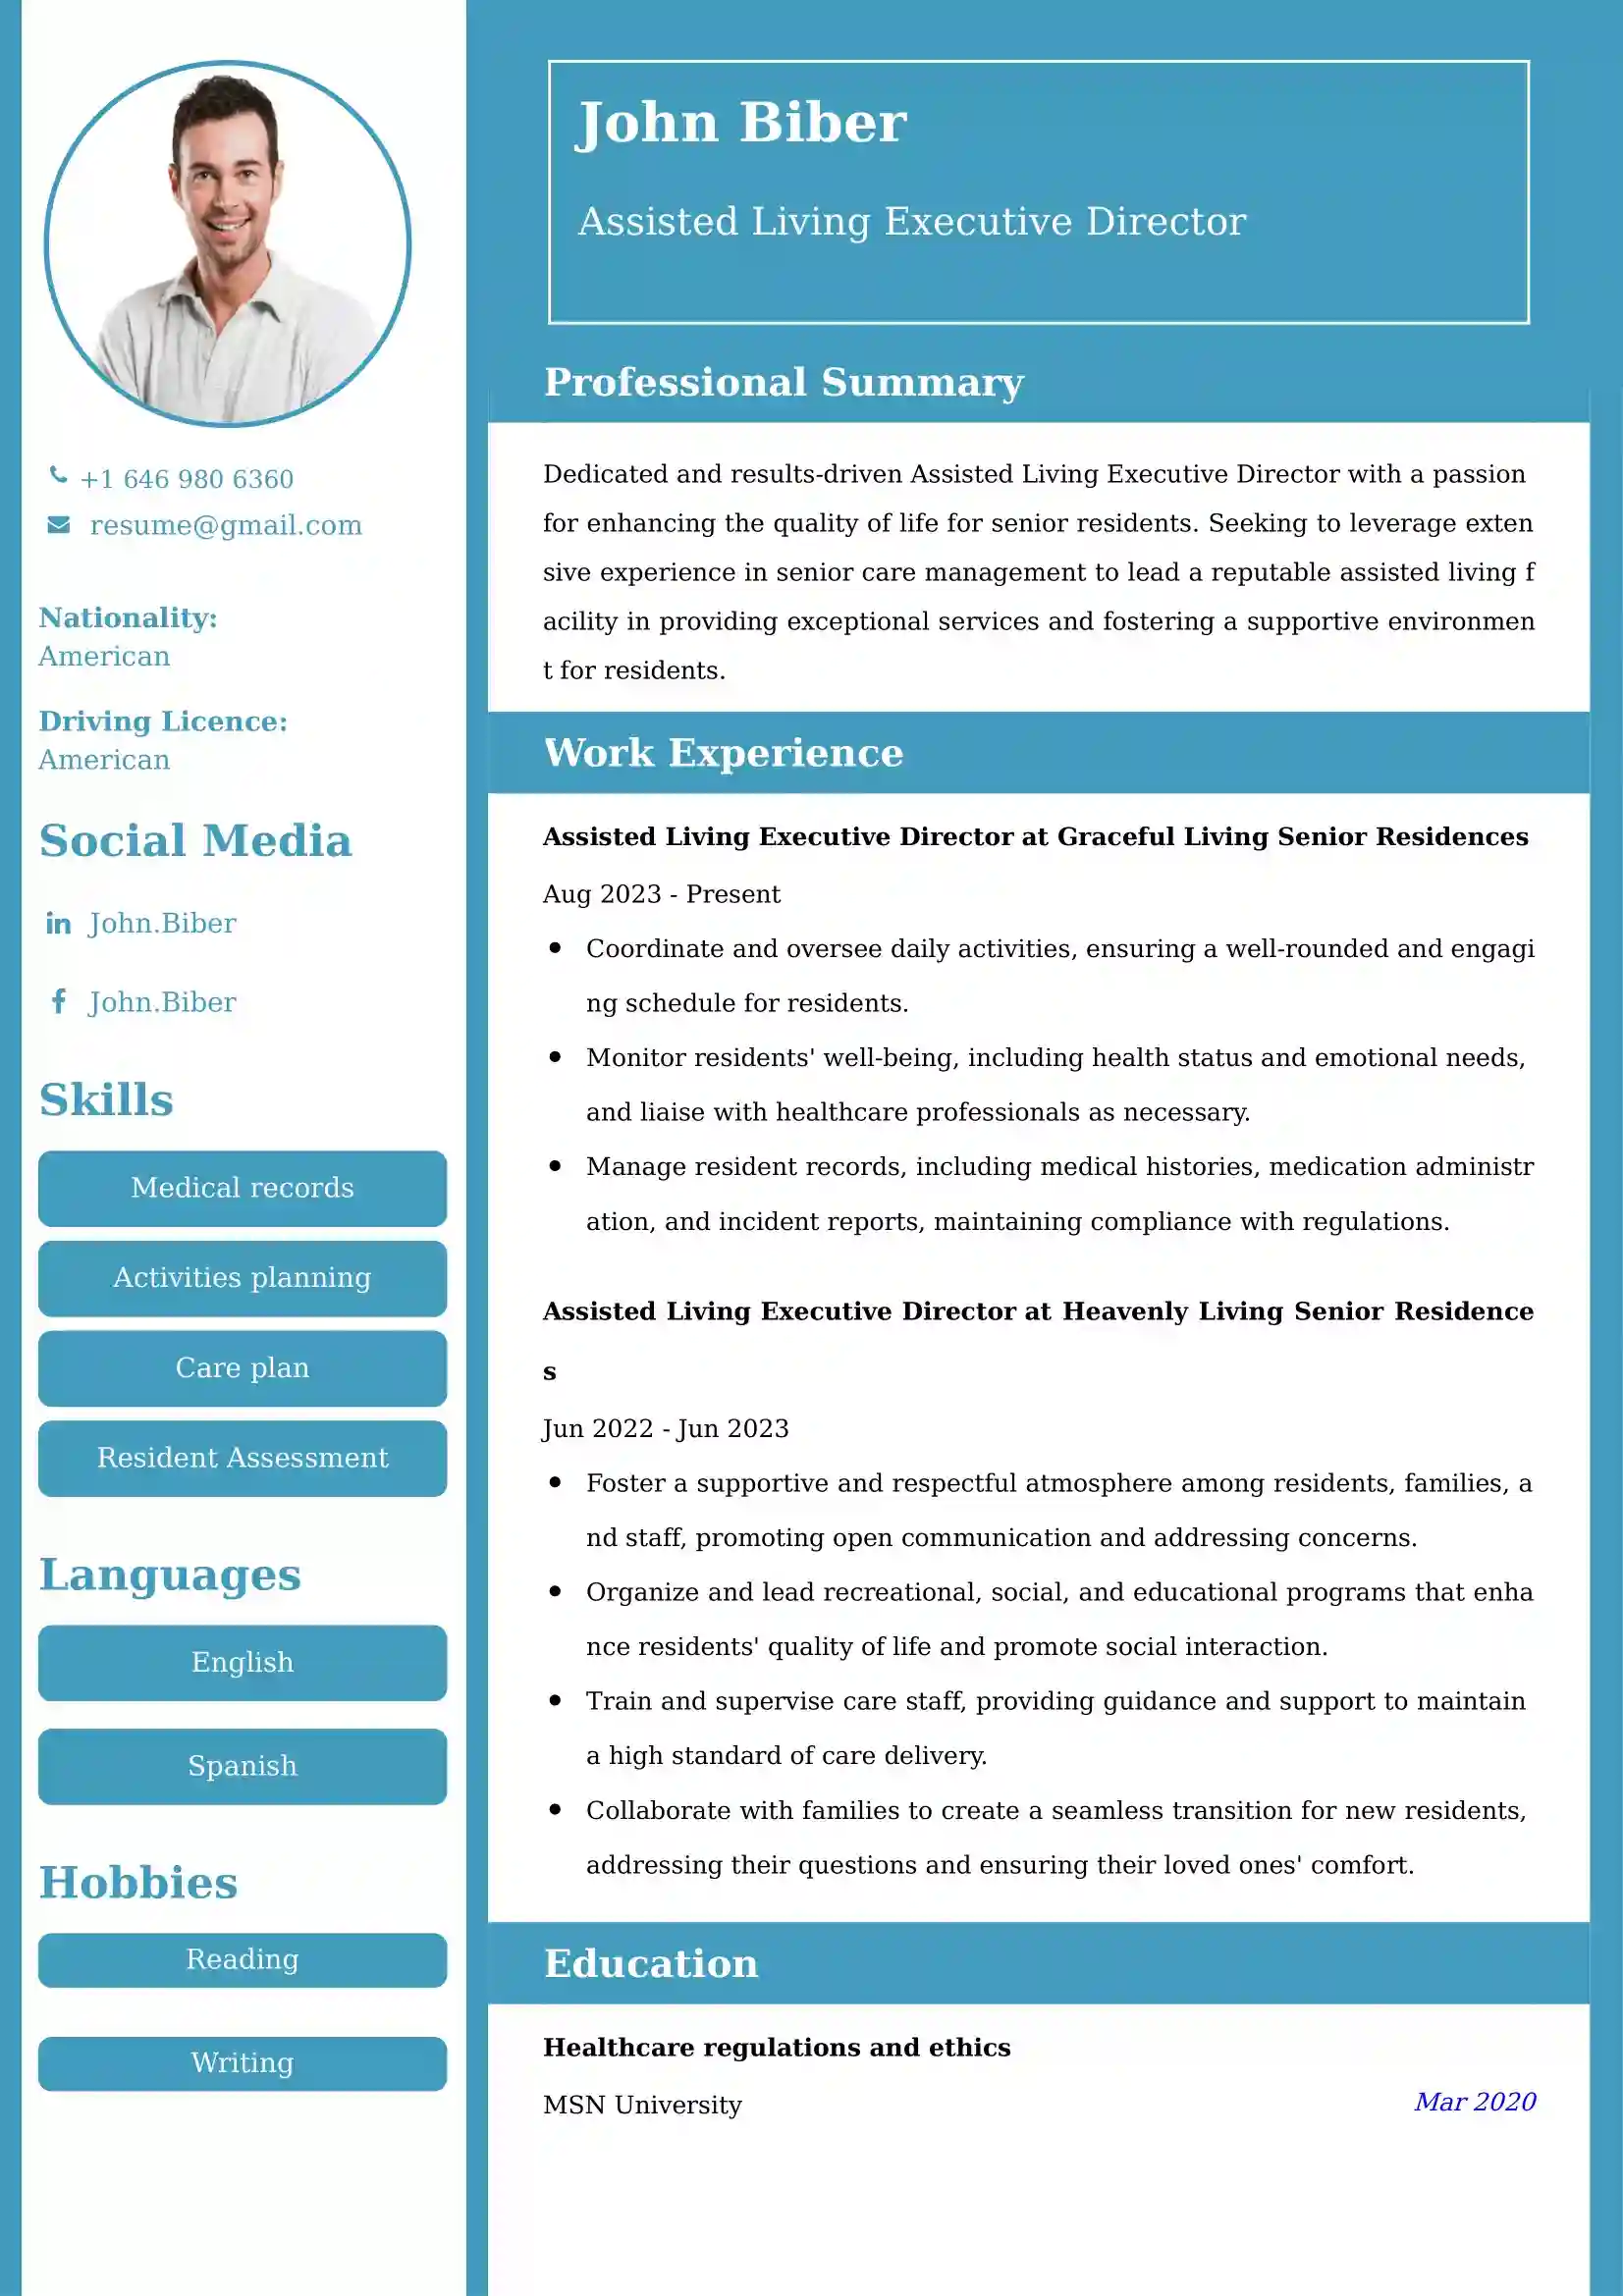 Assisted Living Executive Director Resume Examples - UK Format, Latest Template.